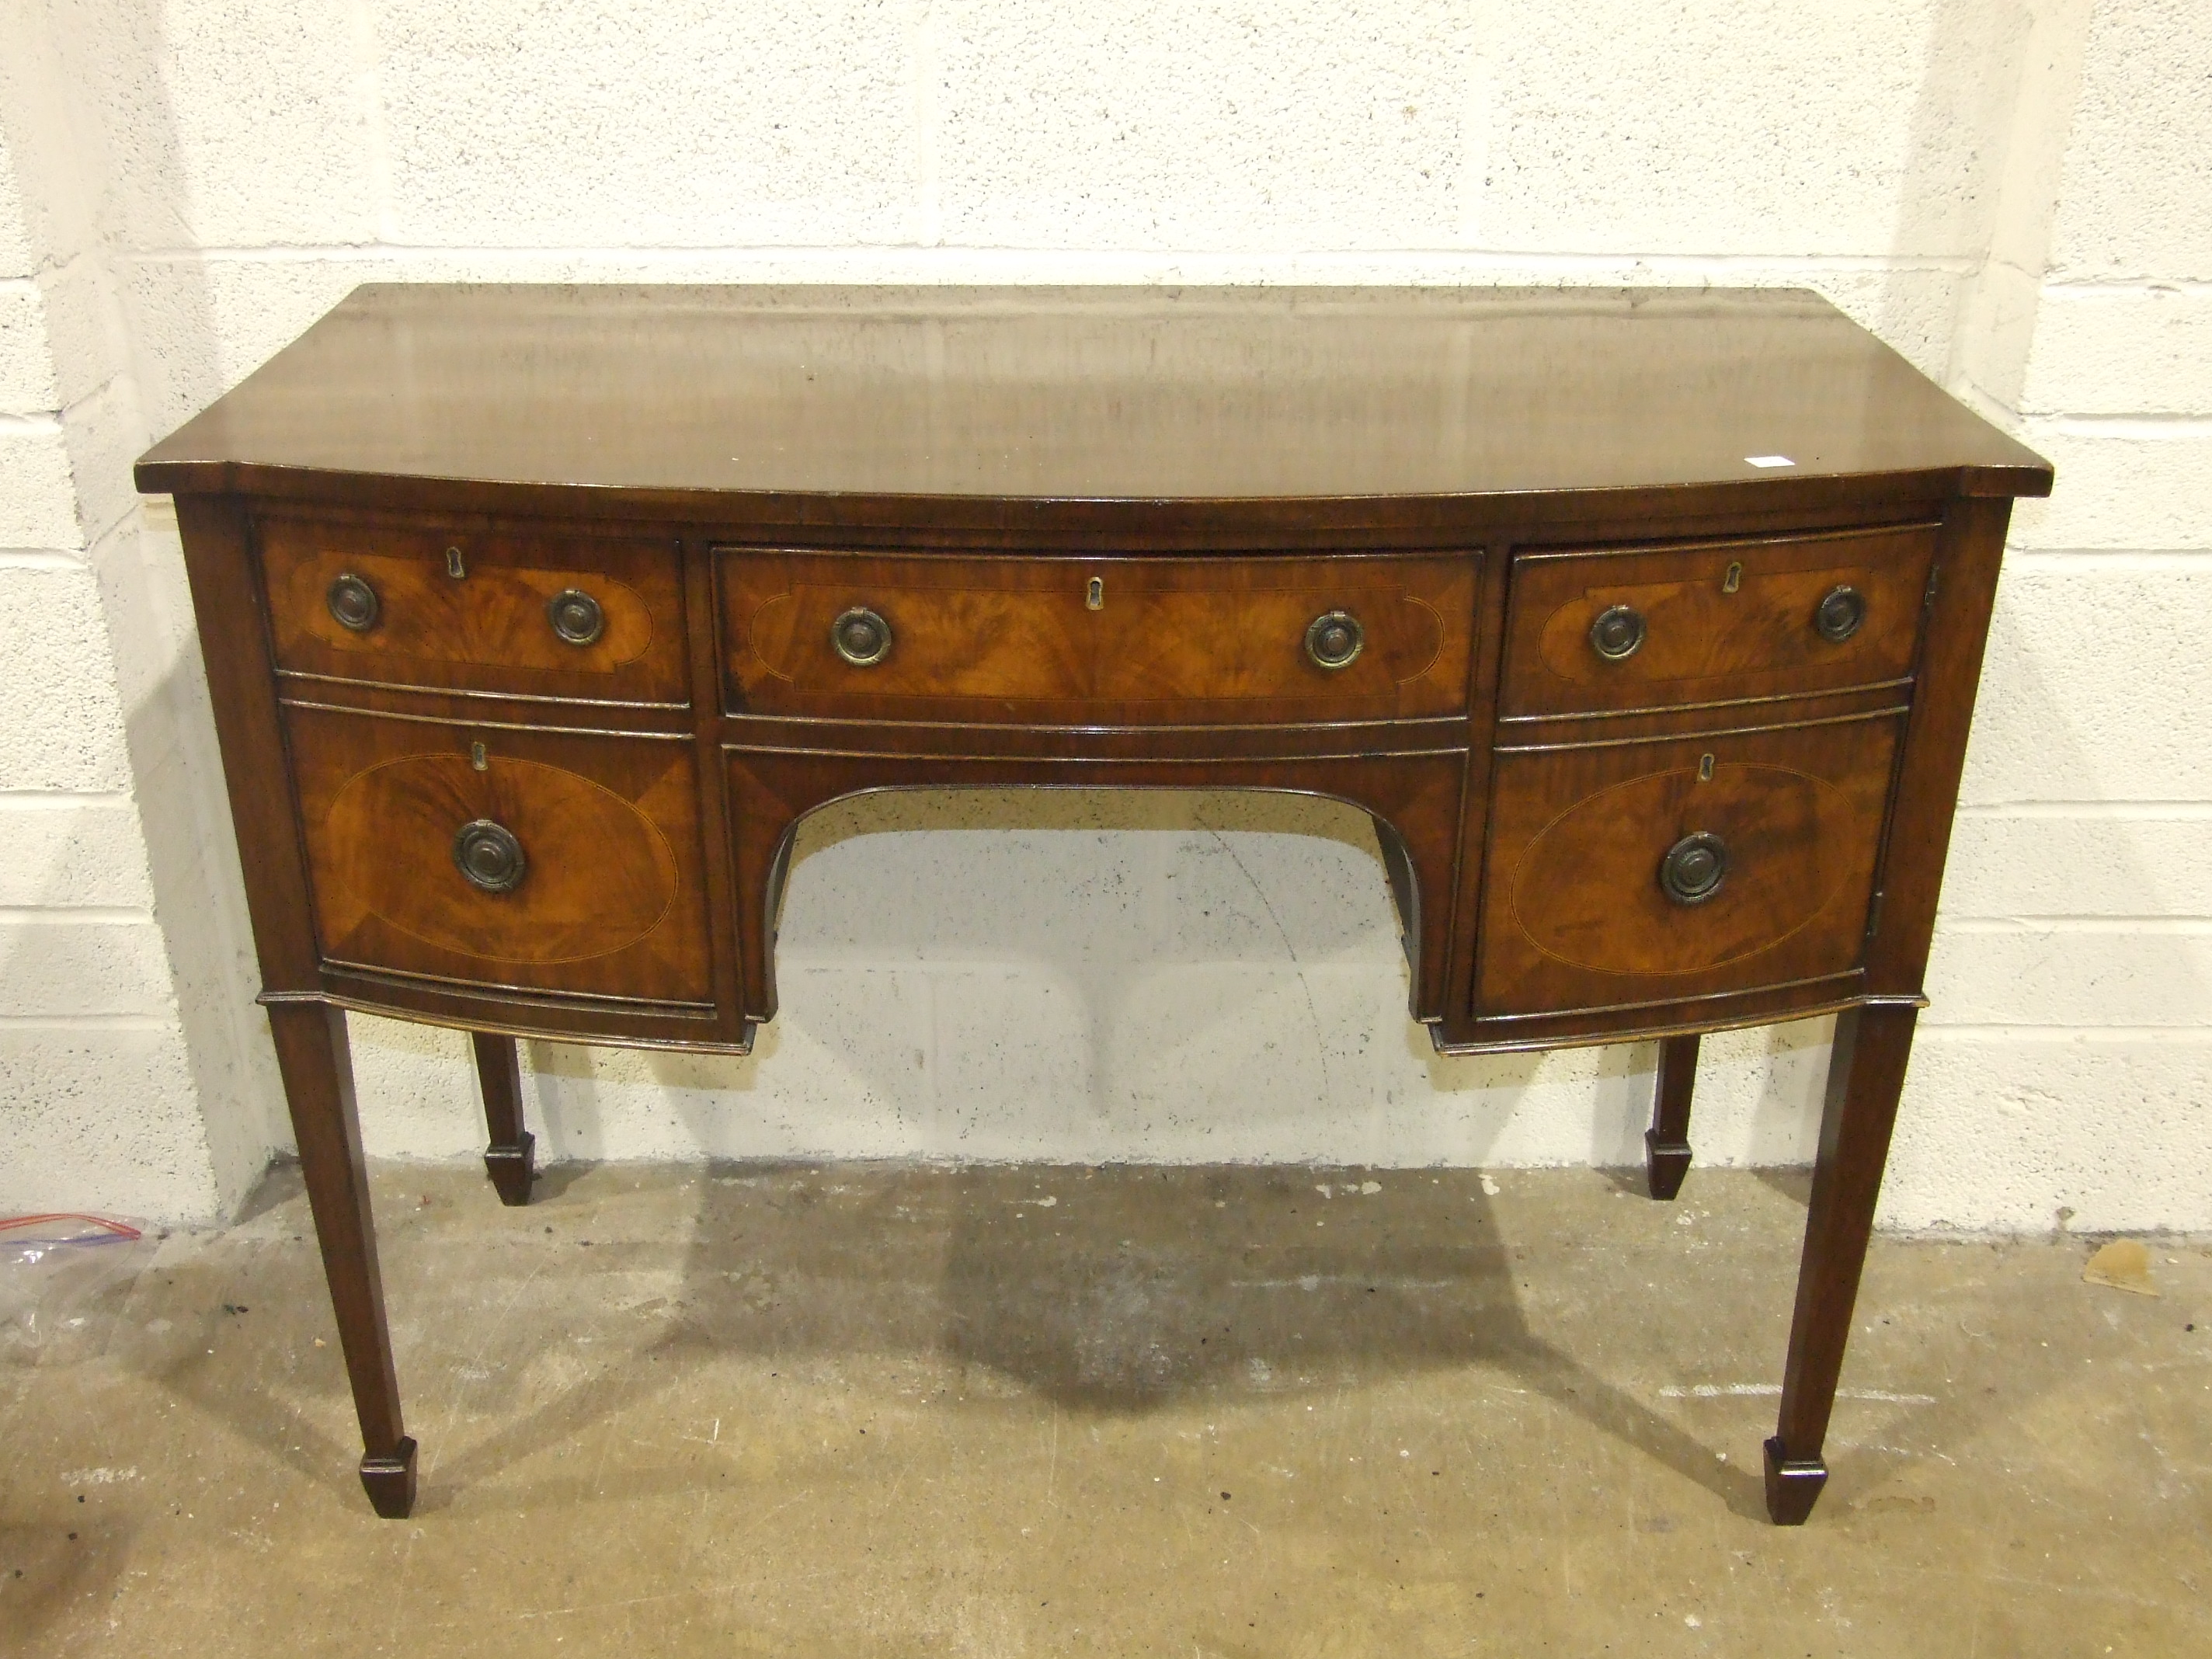 A Georgian-style inlaid mahogany bow-fronted small sideboard fitted with drawers and a cupboard,